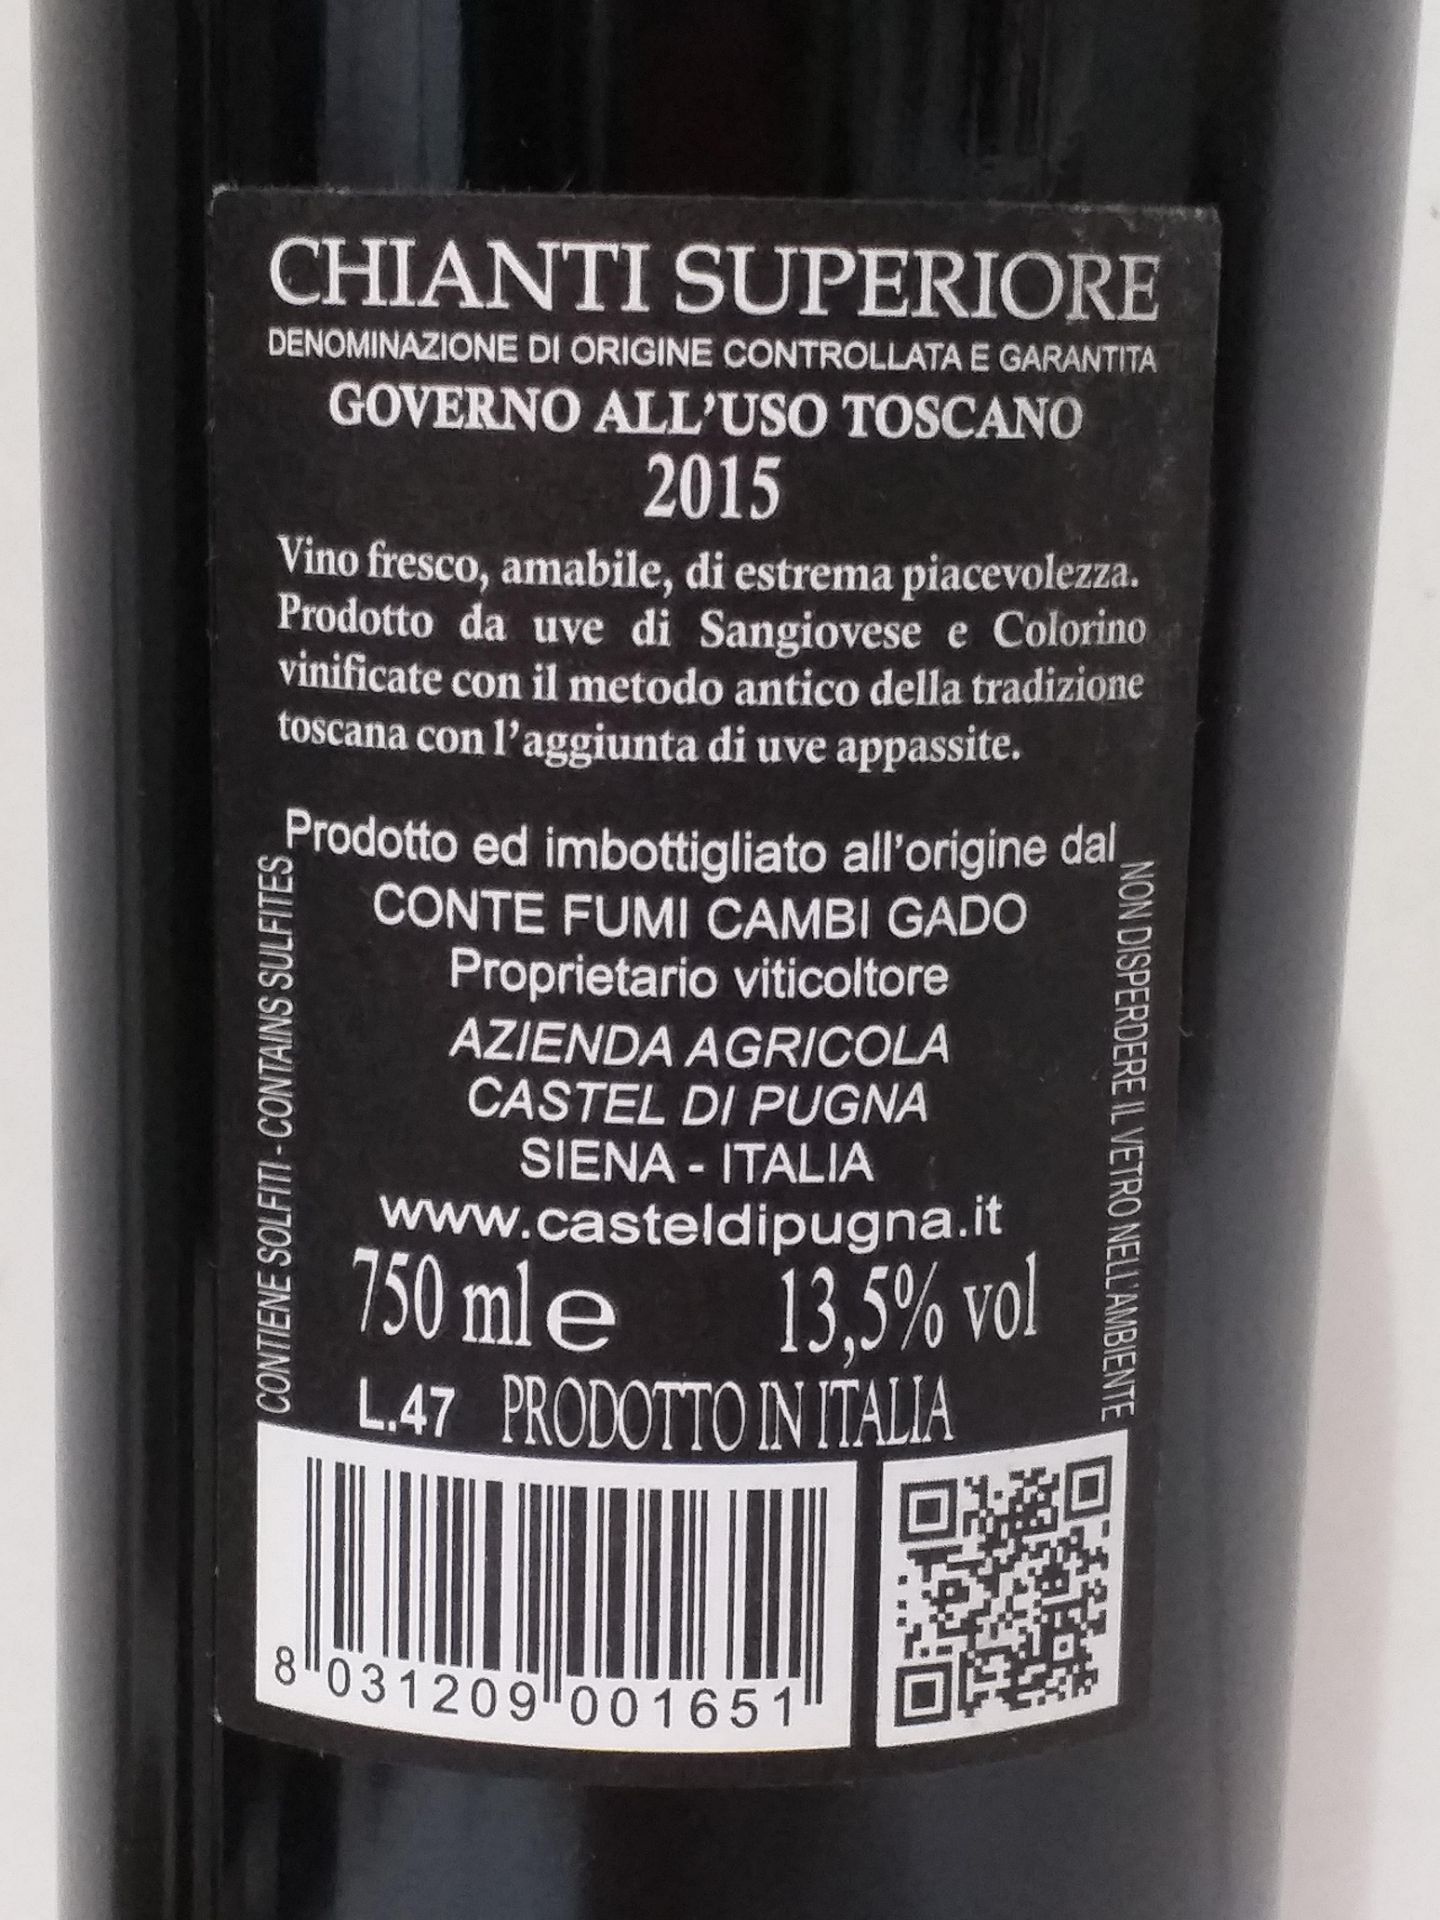 12 Bottles of Chianti Superiore Governo 2015 - Image 3 of 3